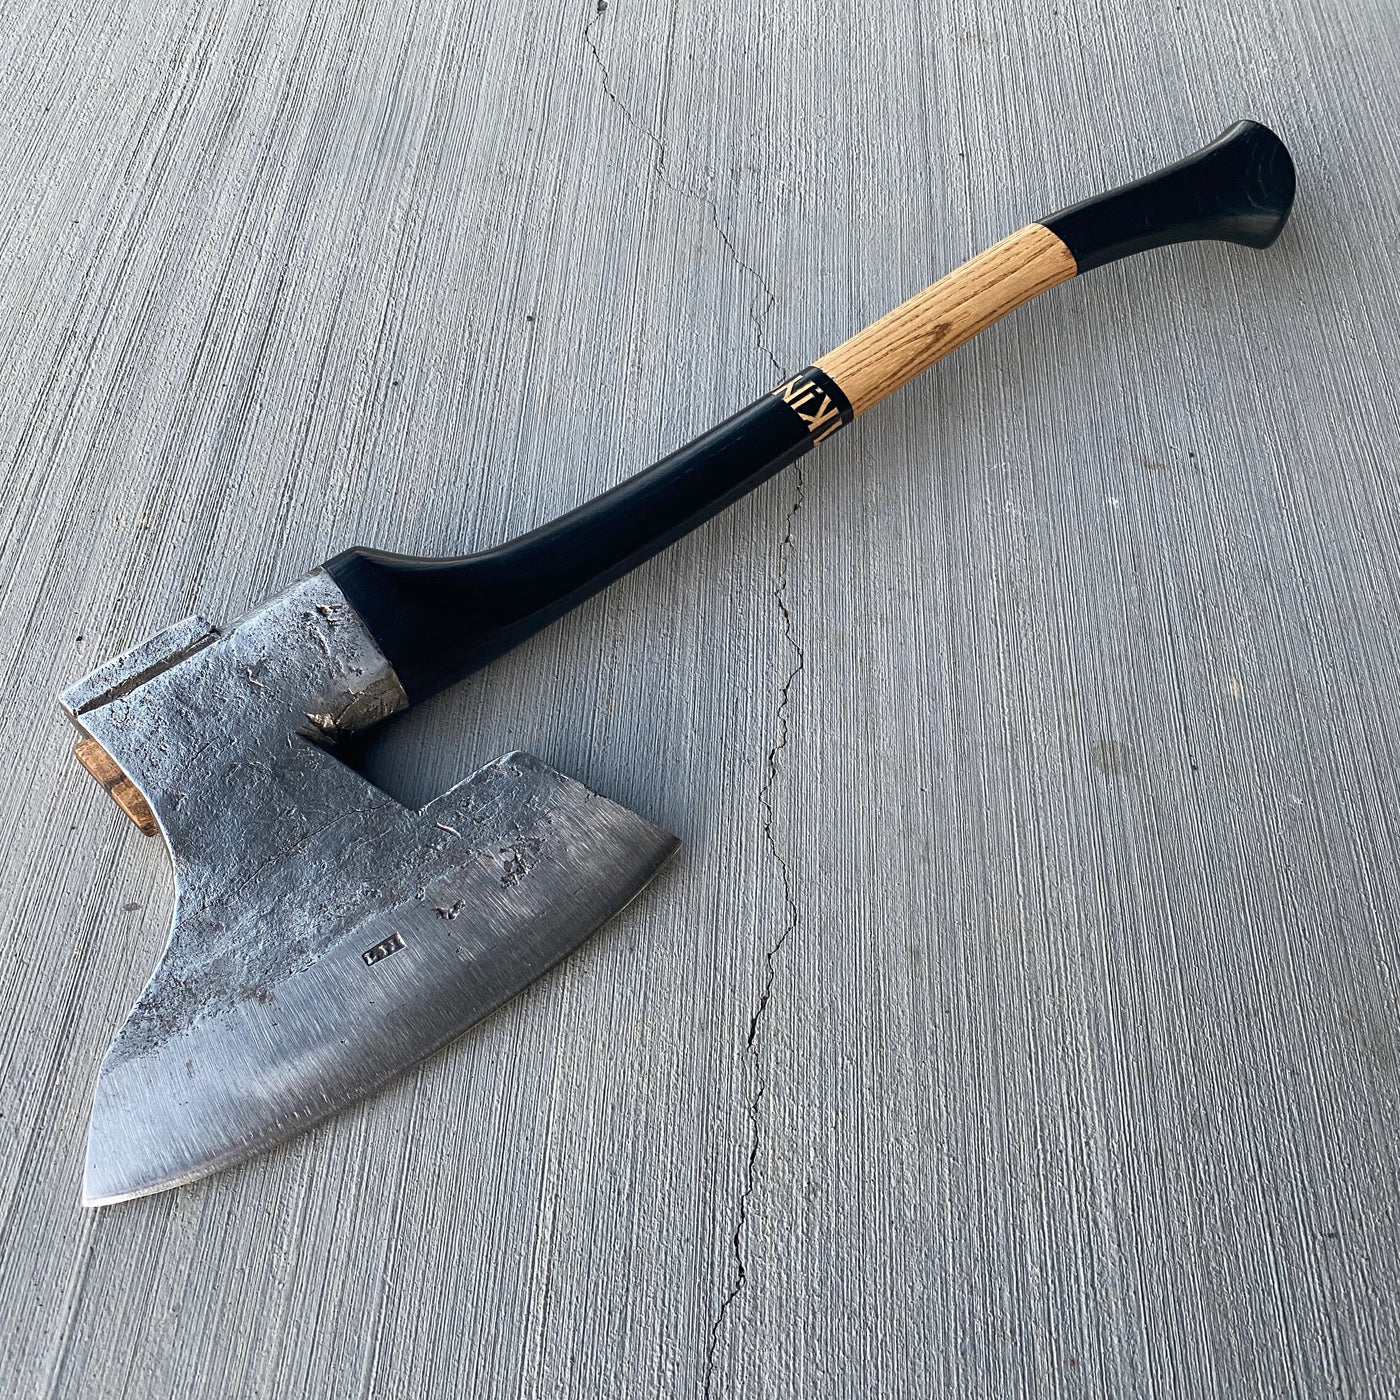 Hand-Forged Swedish Hewing Axe - 19th Century